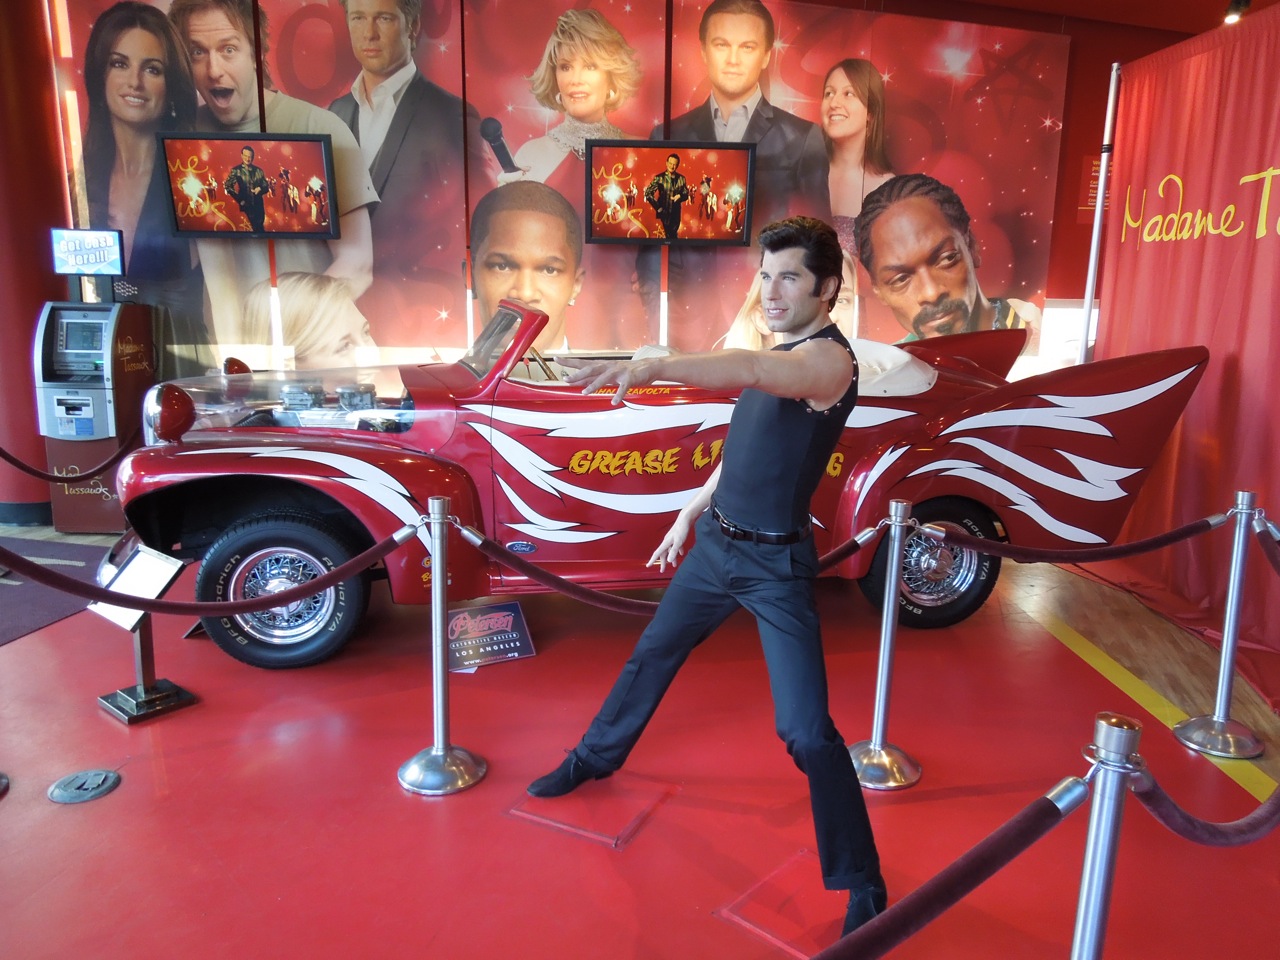 Hollywood Movie Costumes and Props: Grease Lightning car from Grease on  display...